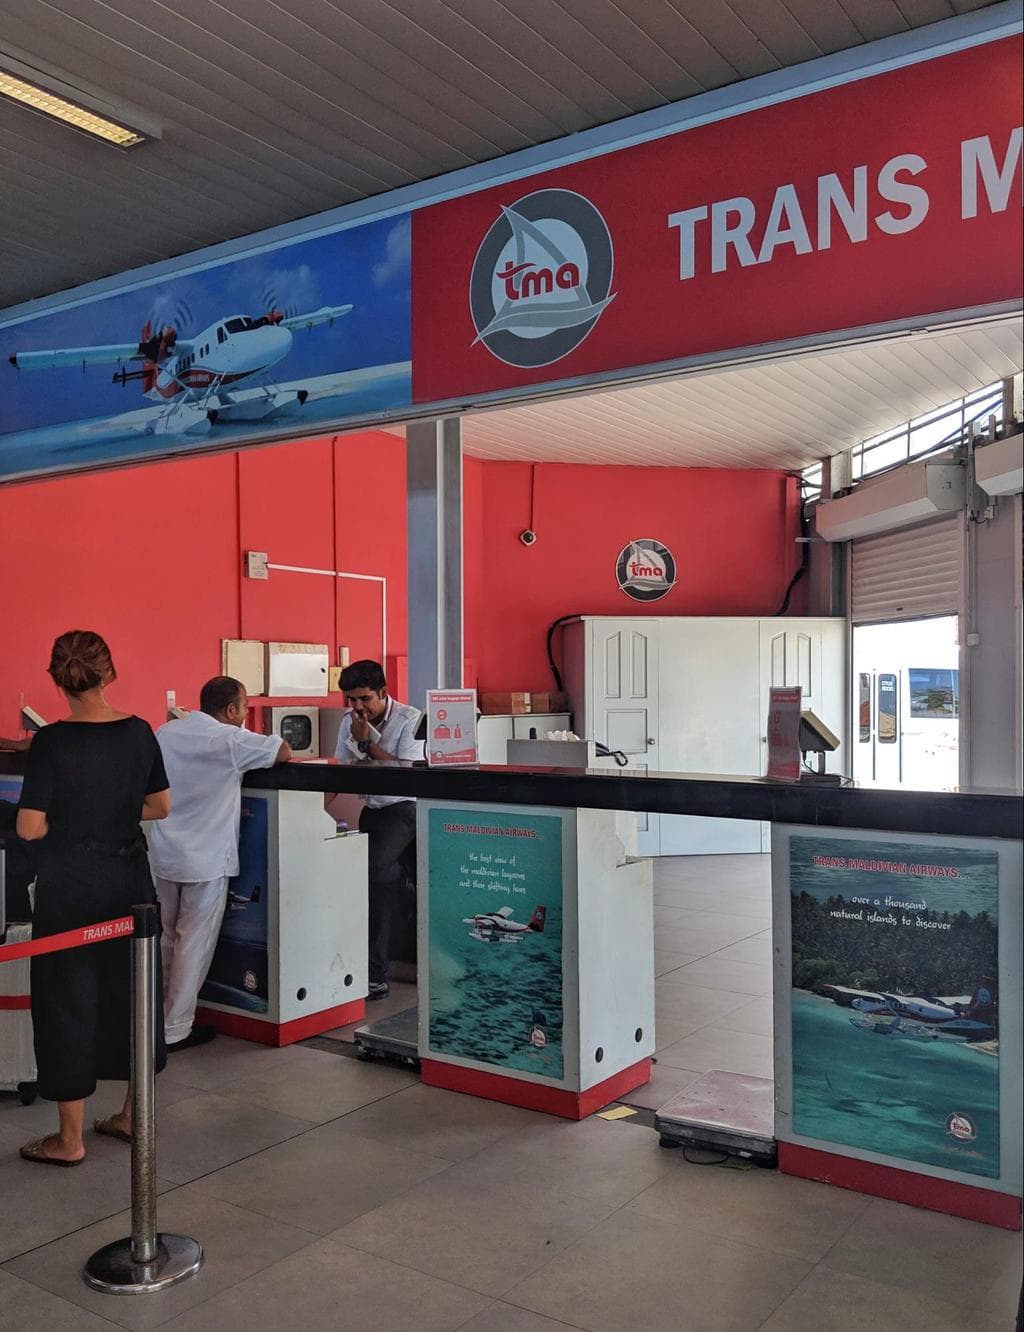 Check in counters for Trans-Maldivian Airlines